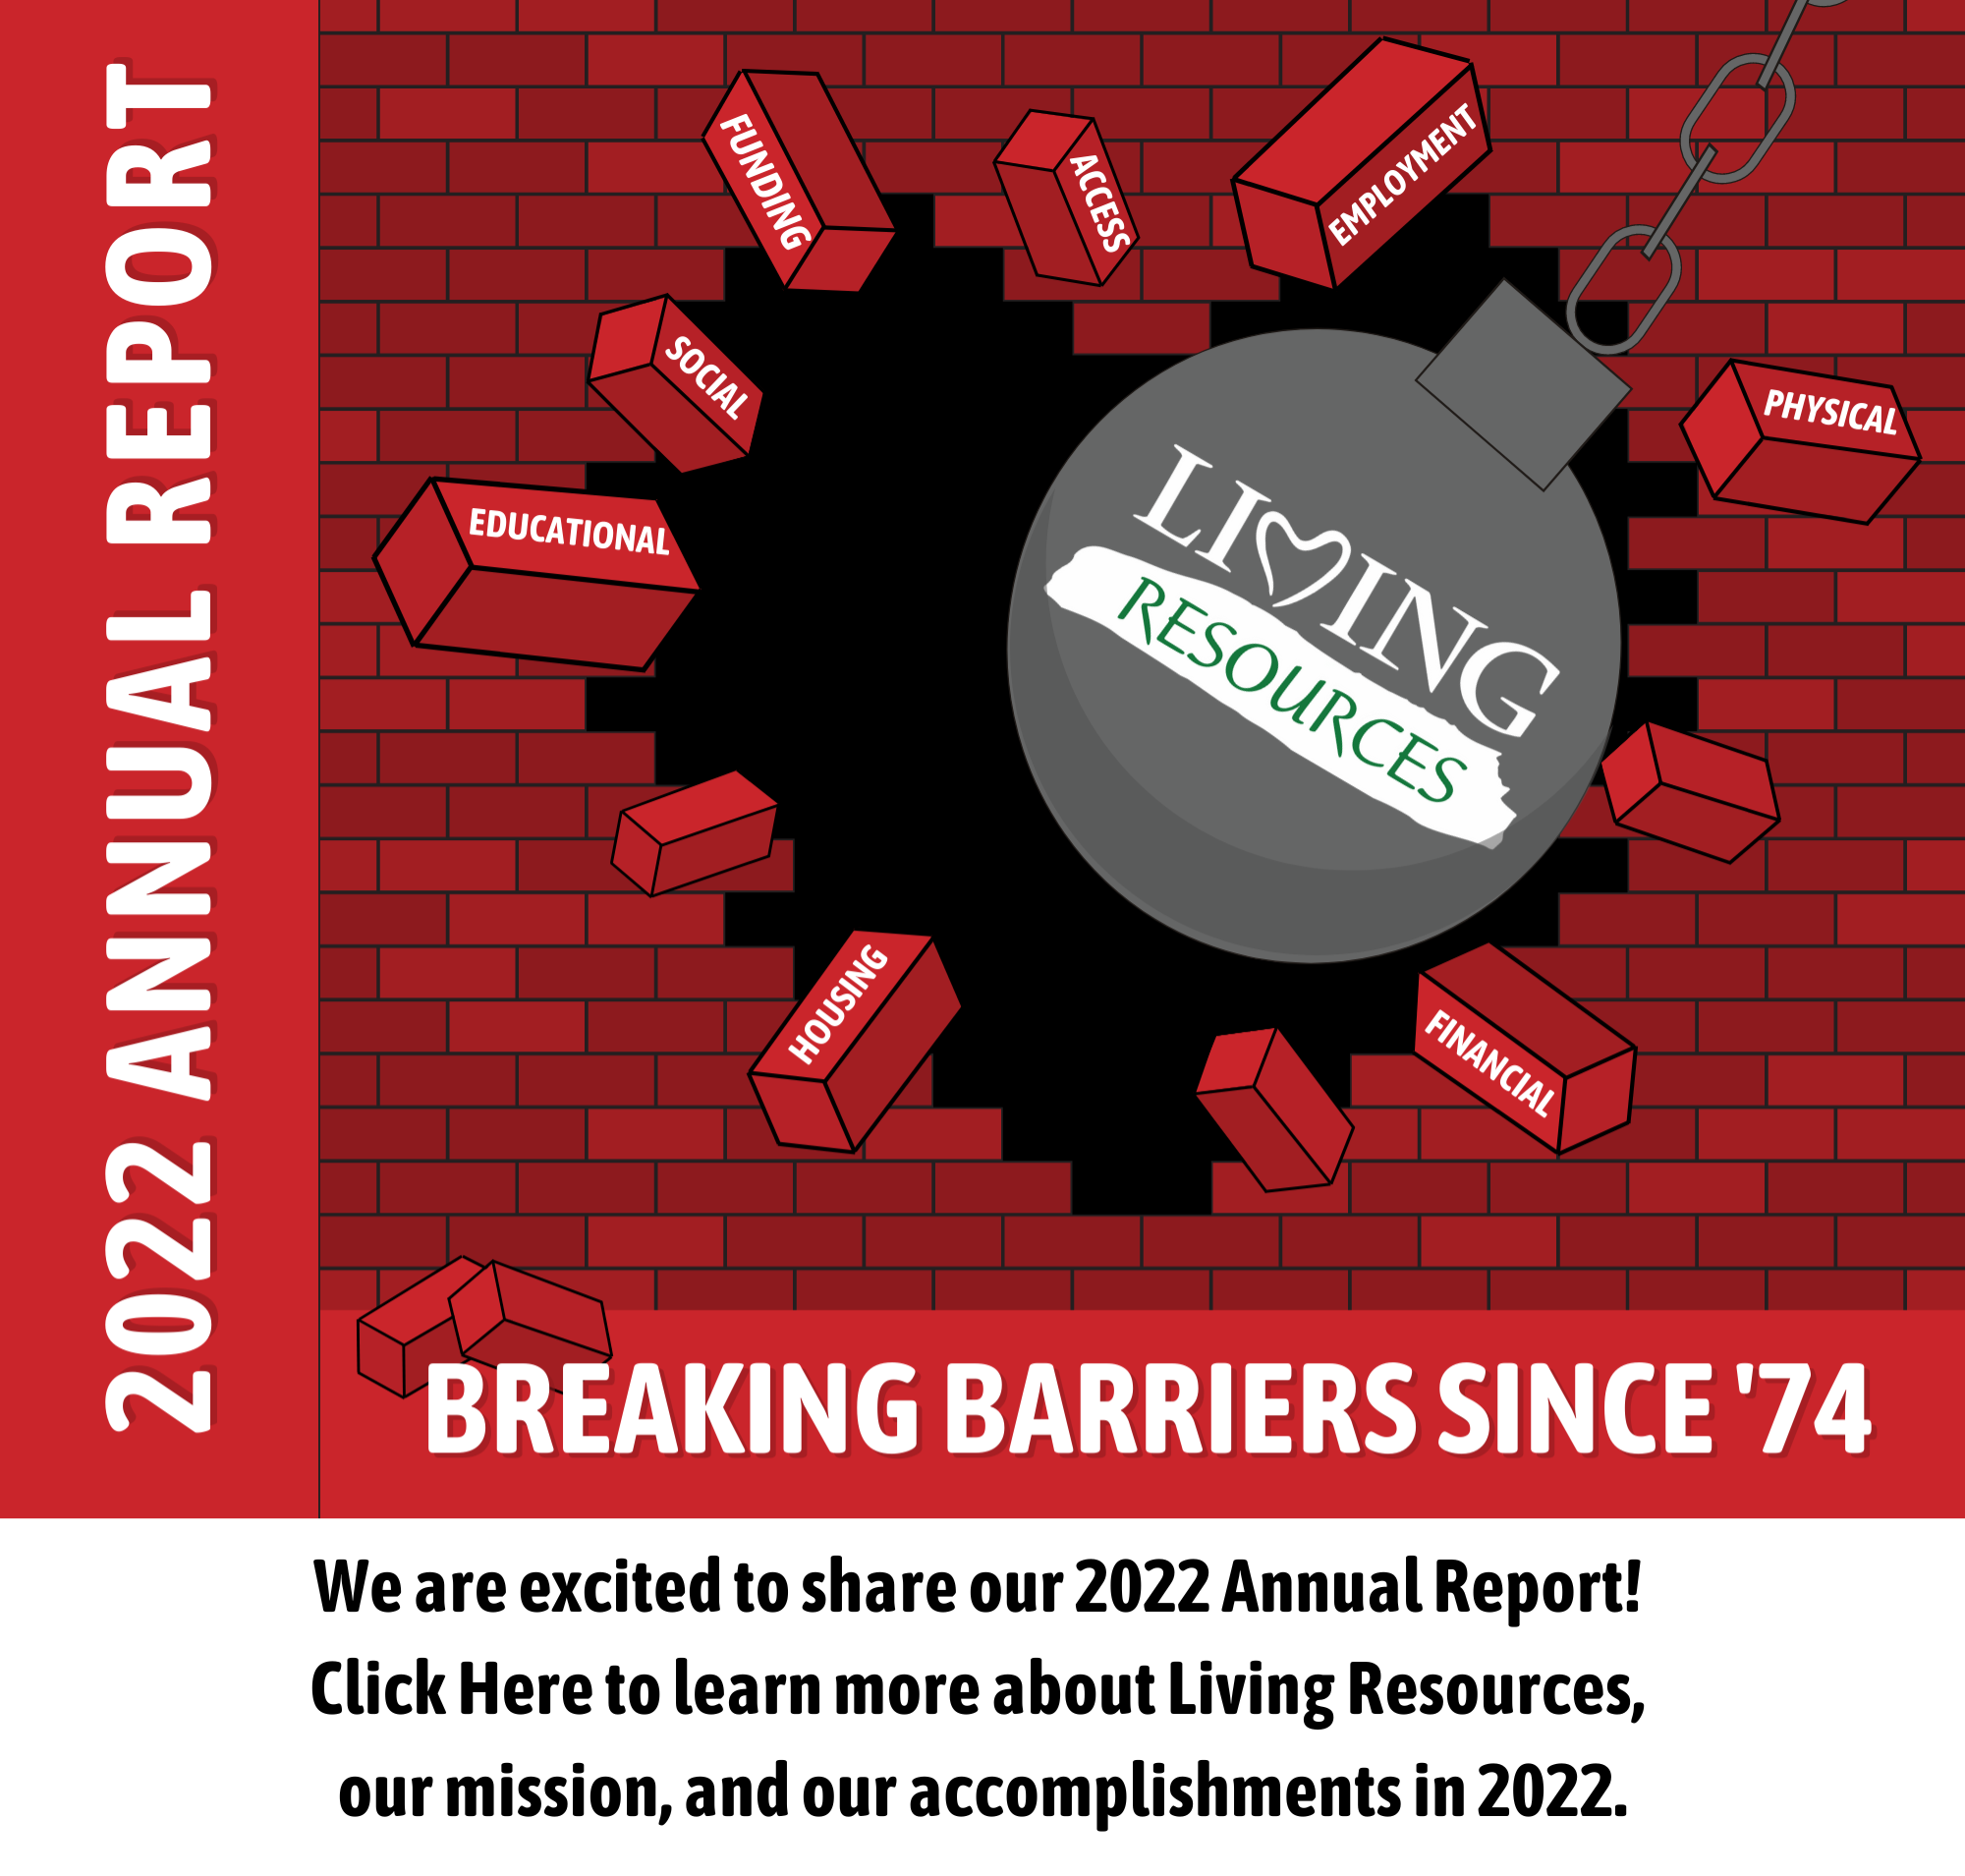 We are excited to share our 2022 Annual Report! Please take a moment to learn more about Living Resources, our mission, and our accomplishments in 2022.